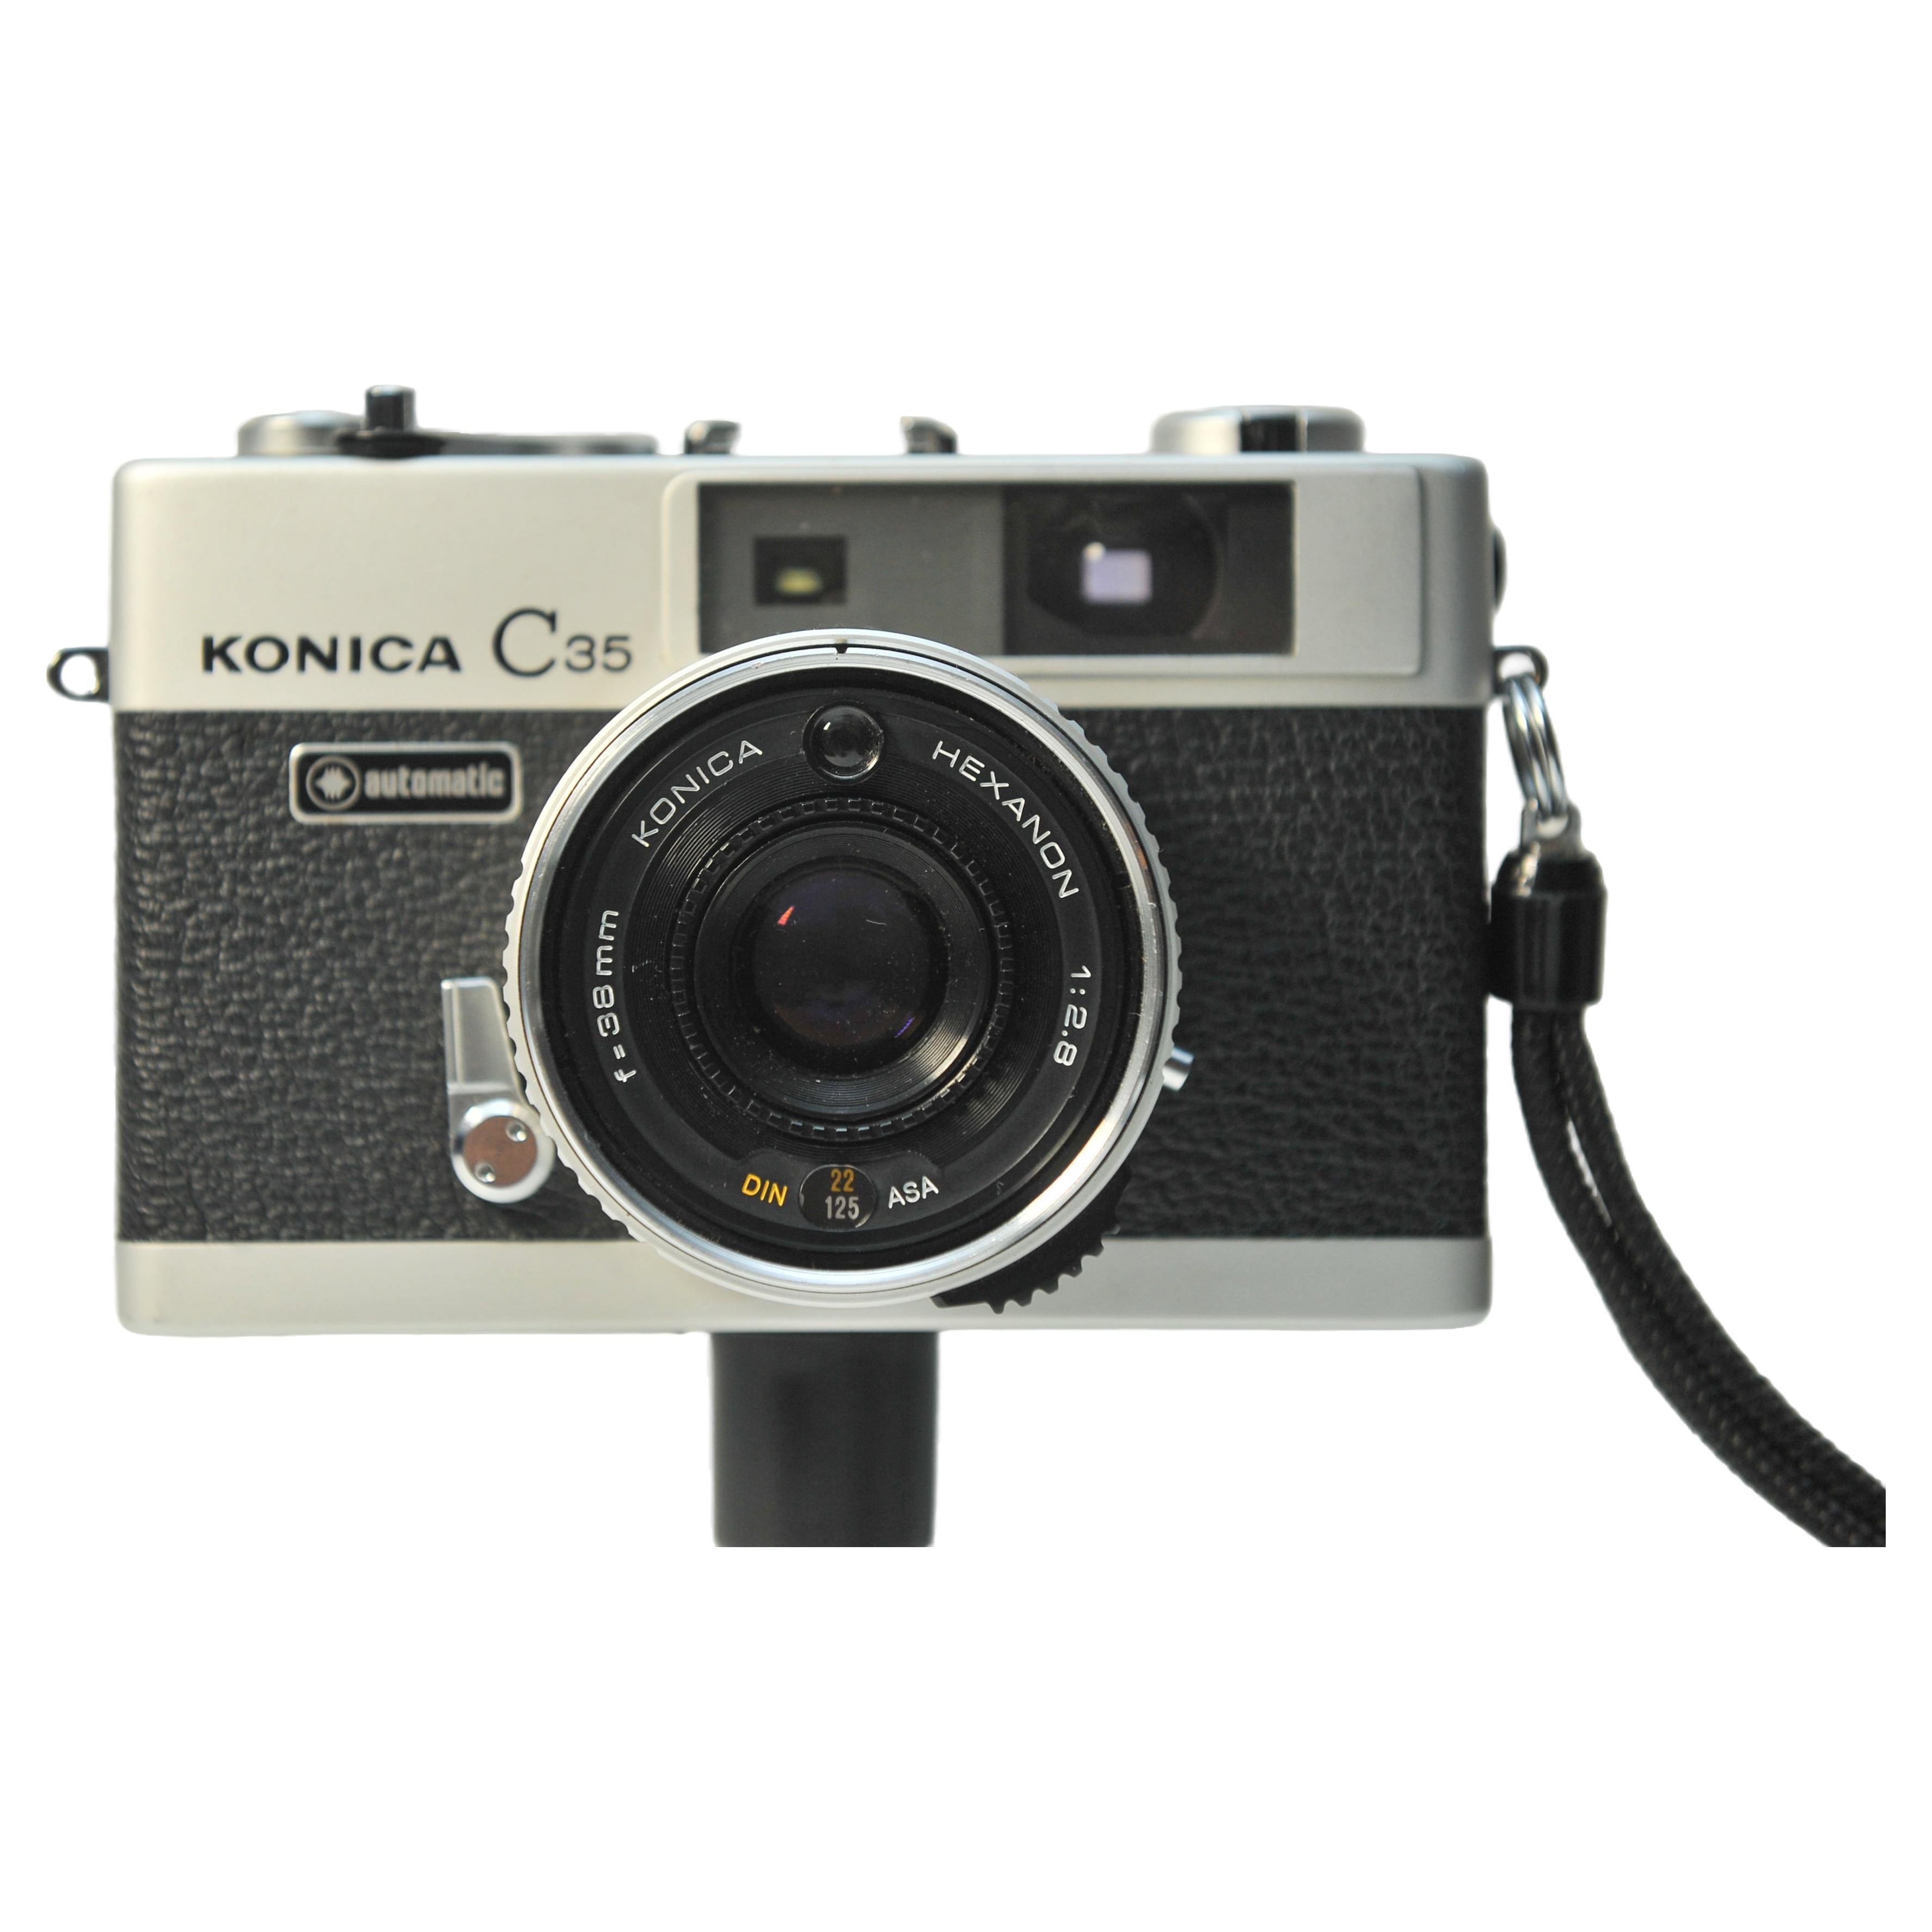 Konica C35 Automatic 35mm Film Compact Rangefinder Camera with 38mm Hexanon F2.8 For Sale